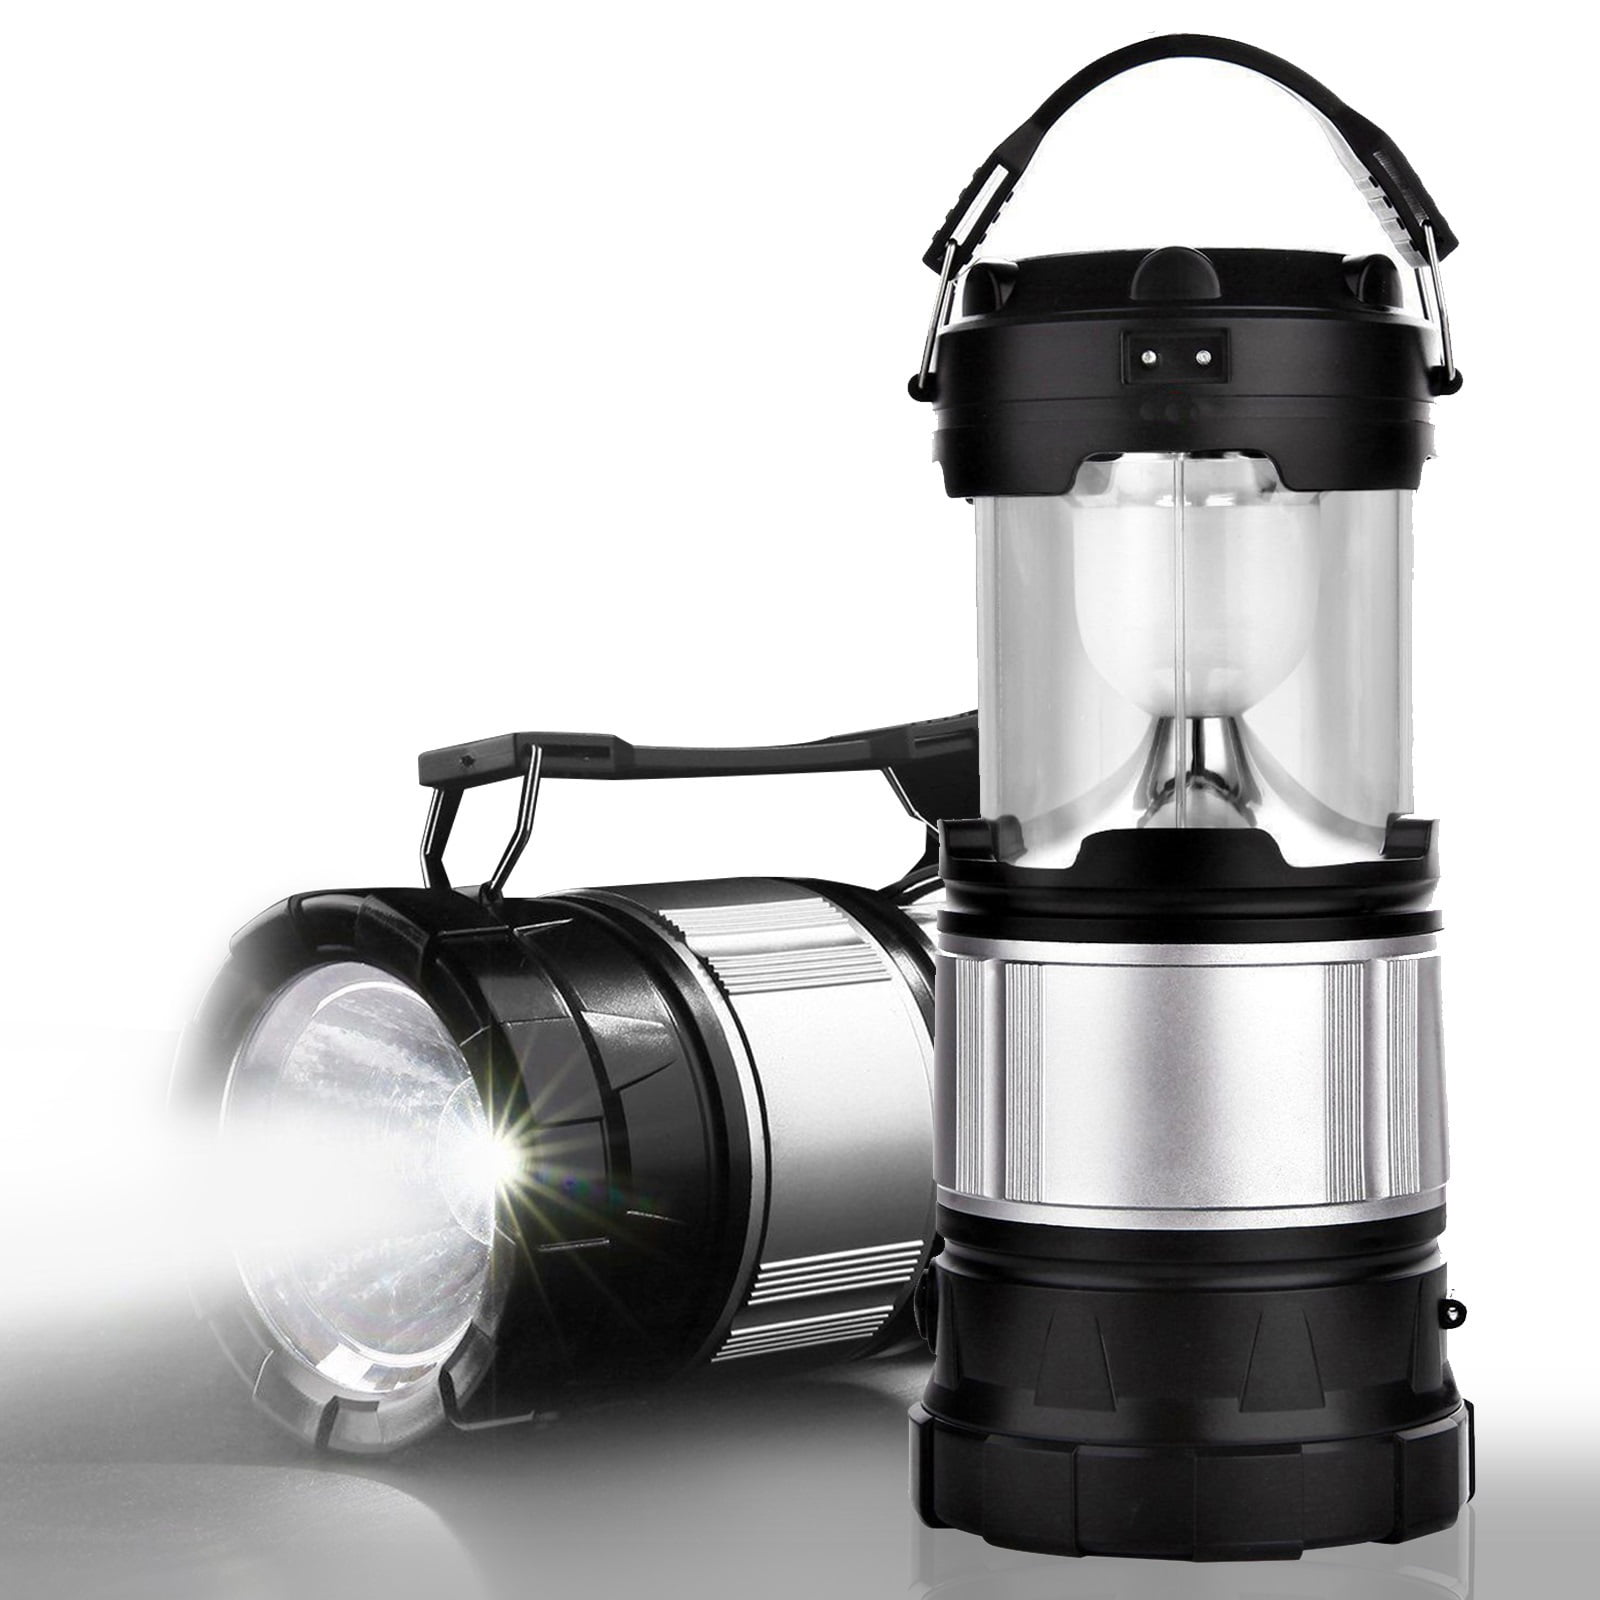 LEDs32 Superbright  Large Rechargeable Lantern With USB Charging,Run time 9hours 